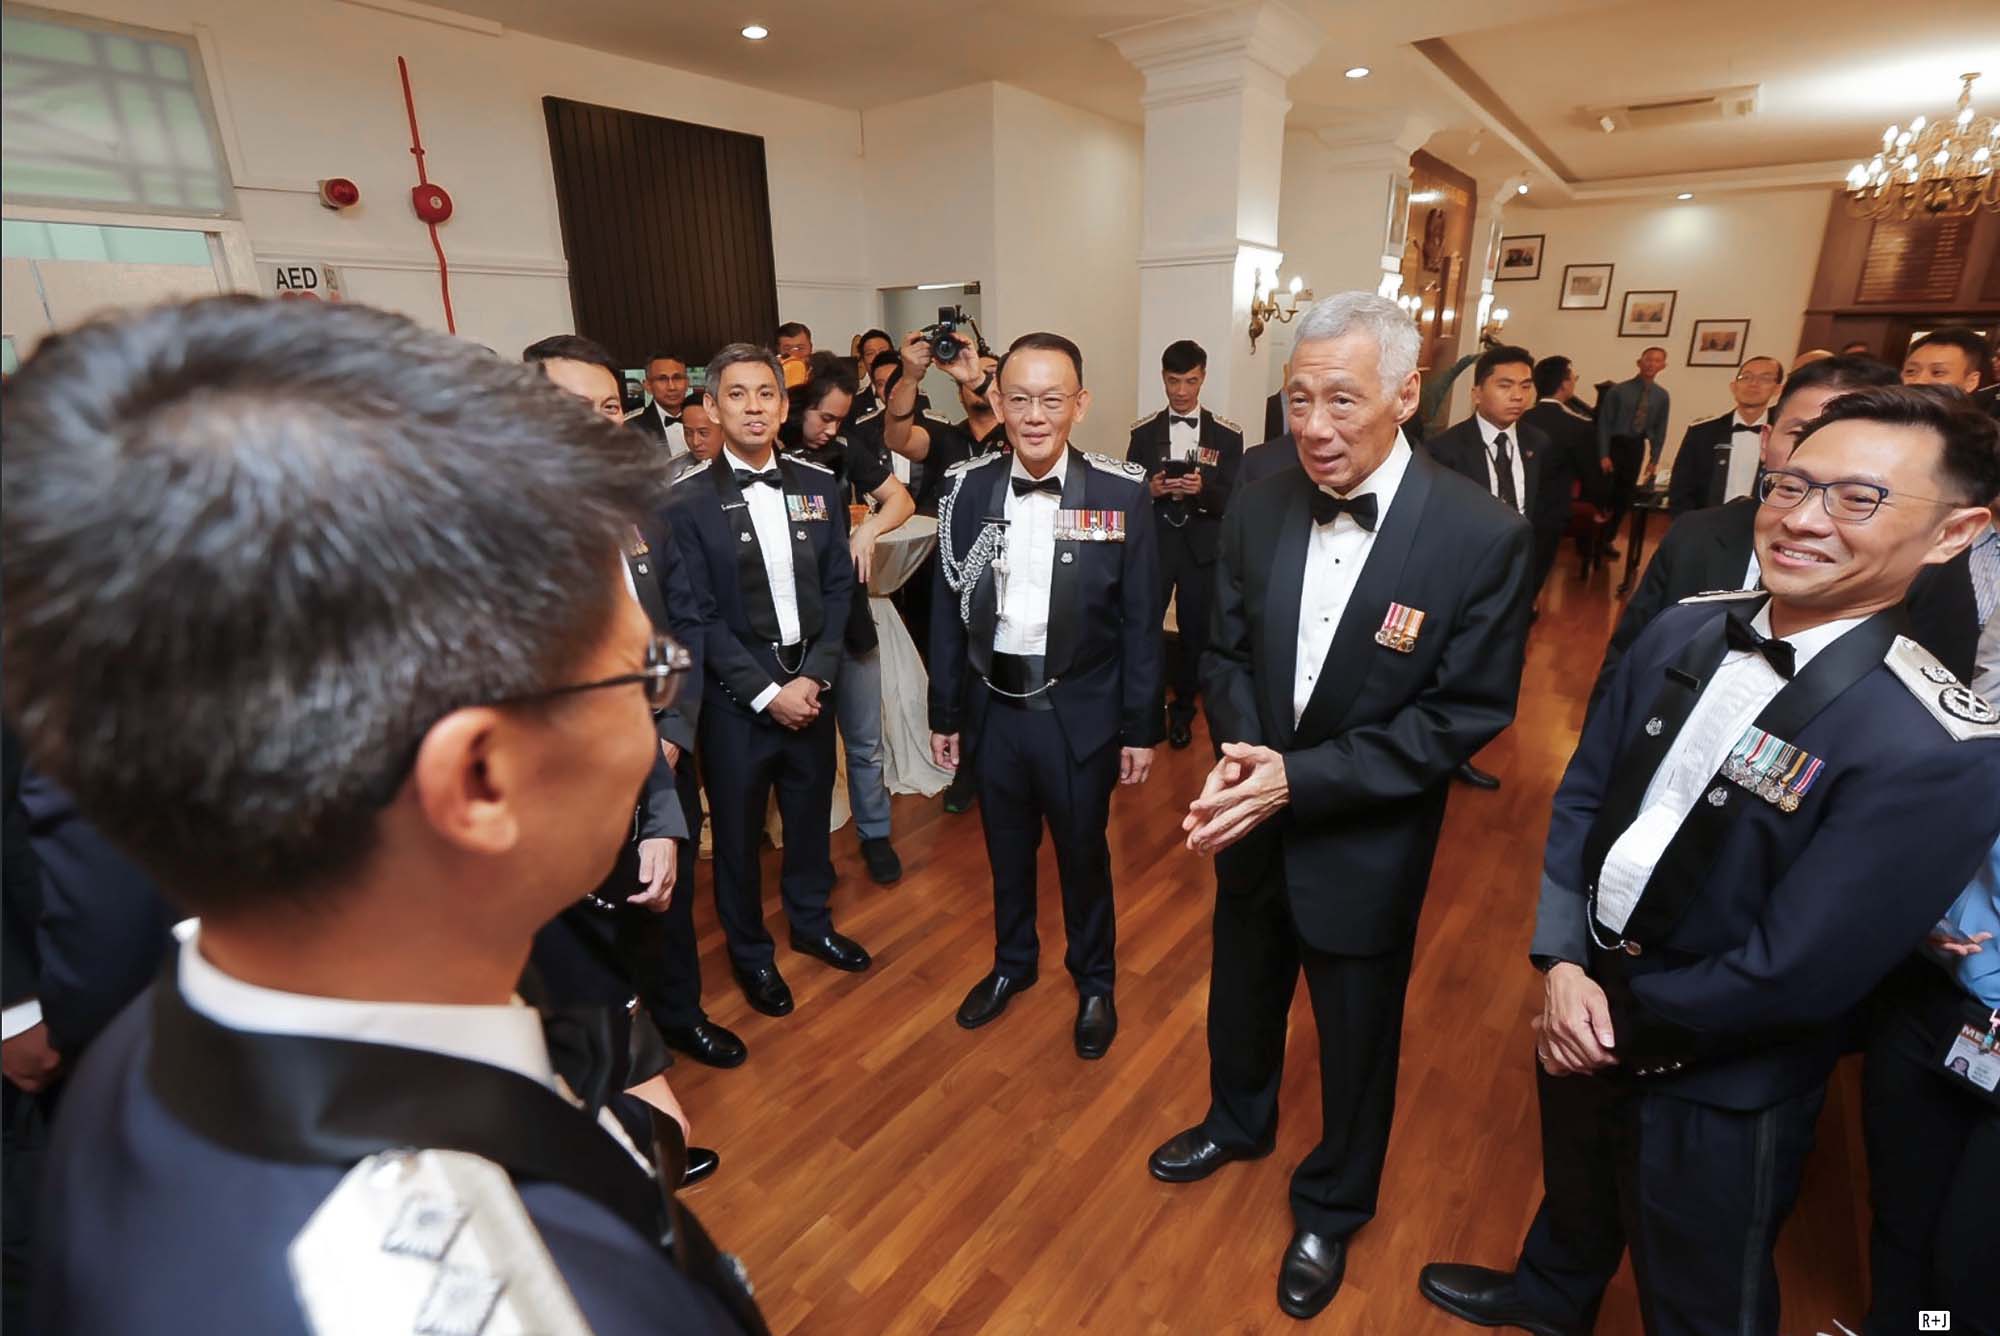 PM Lee Hsien Loong interacting with Police officers.